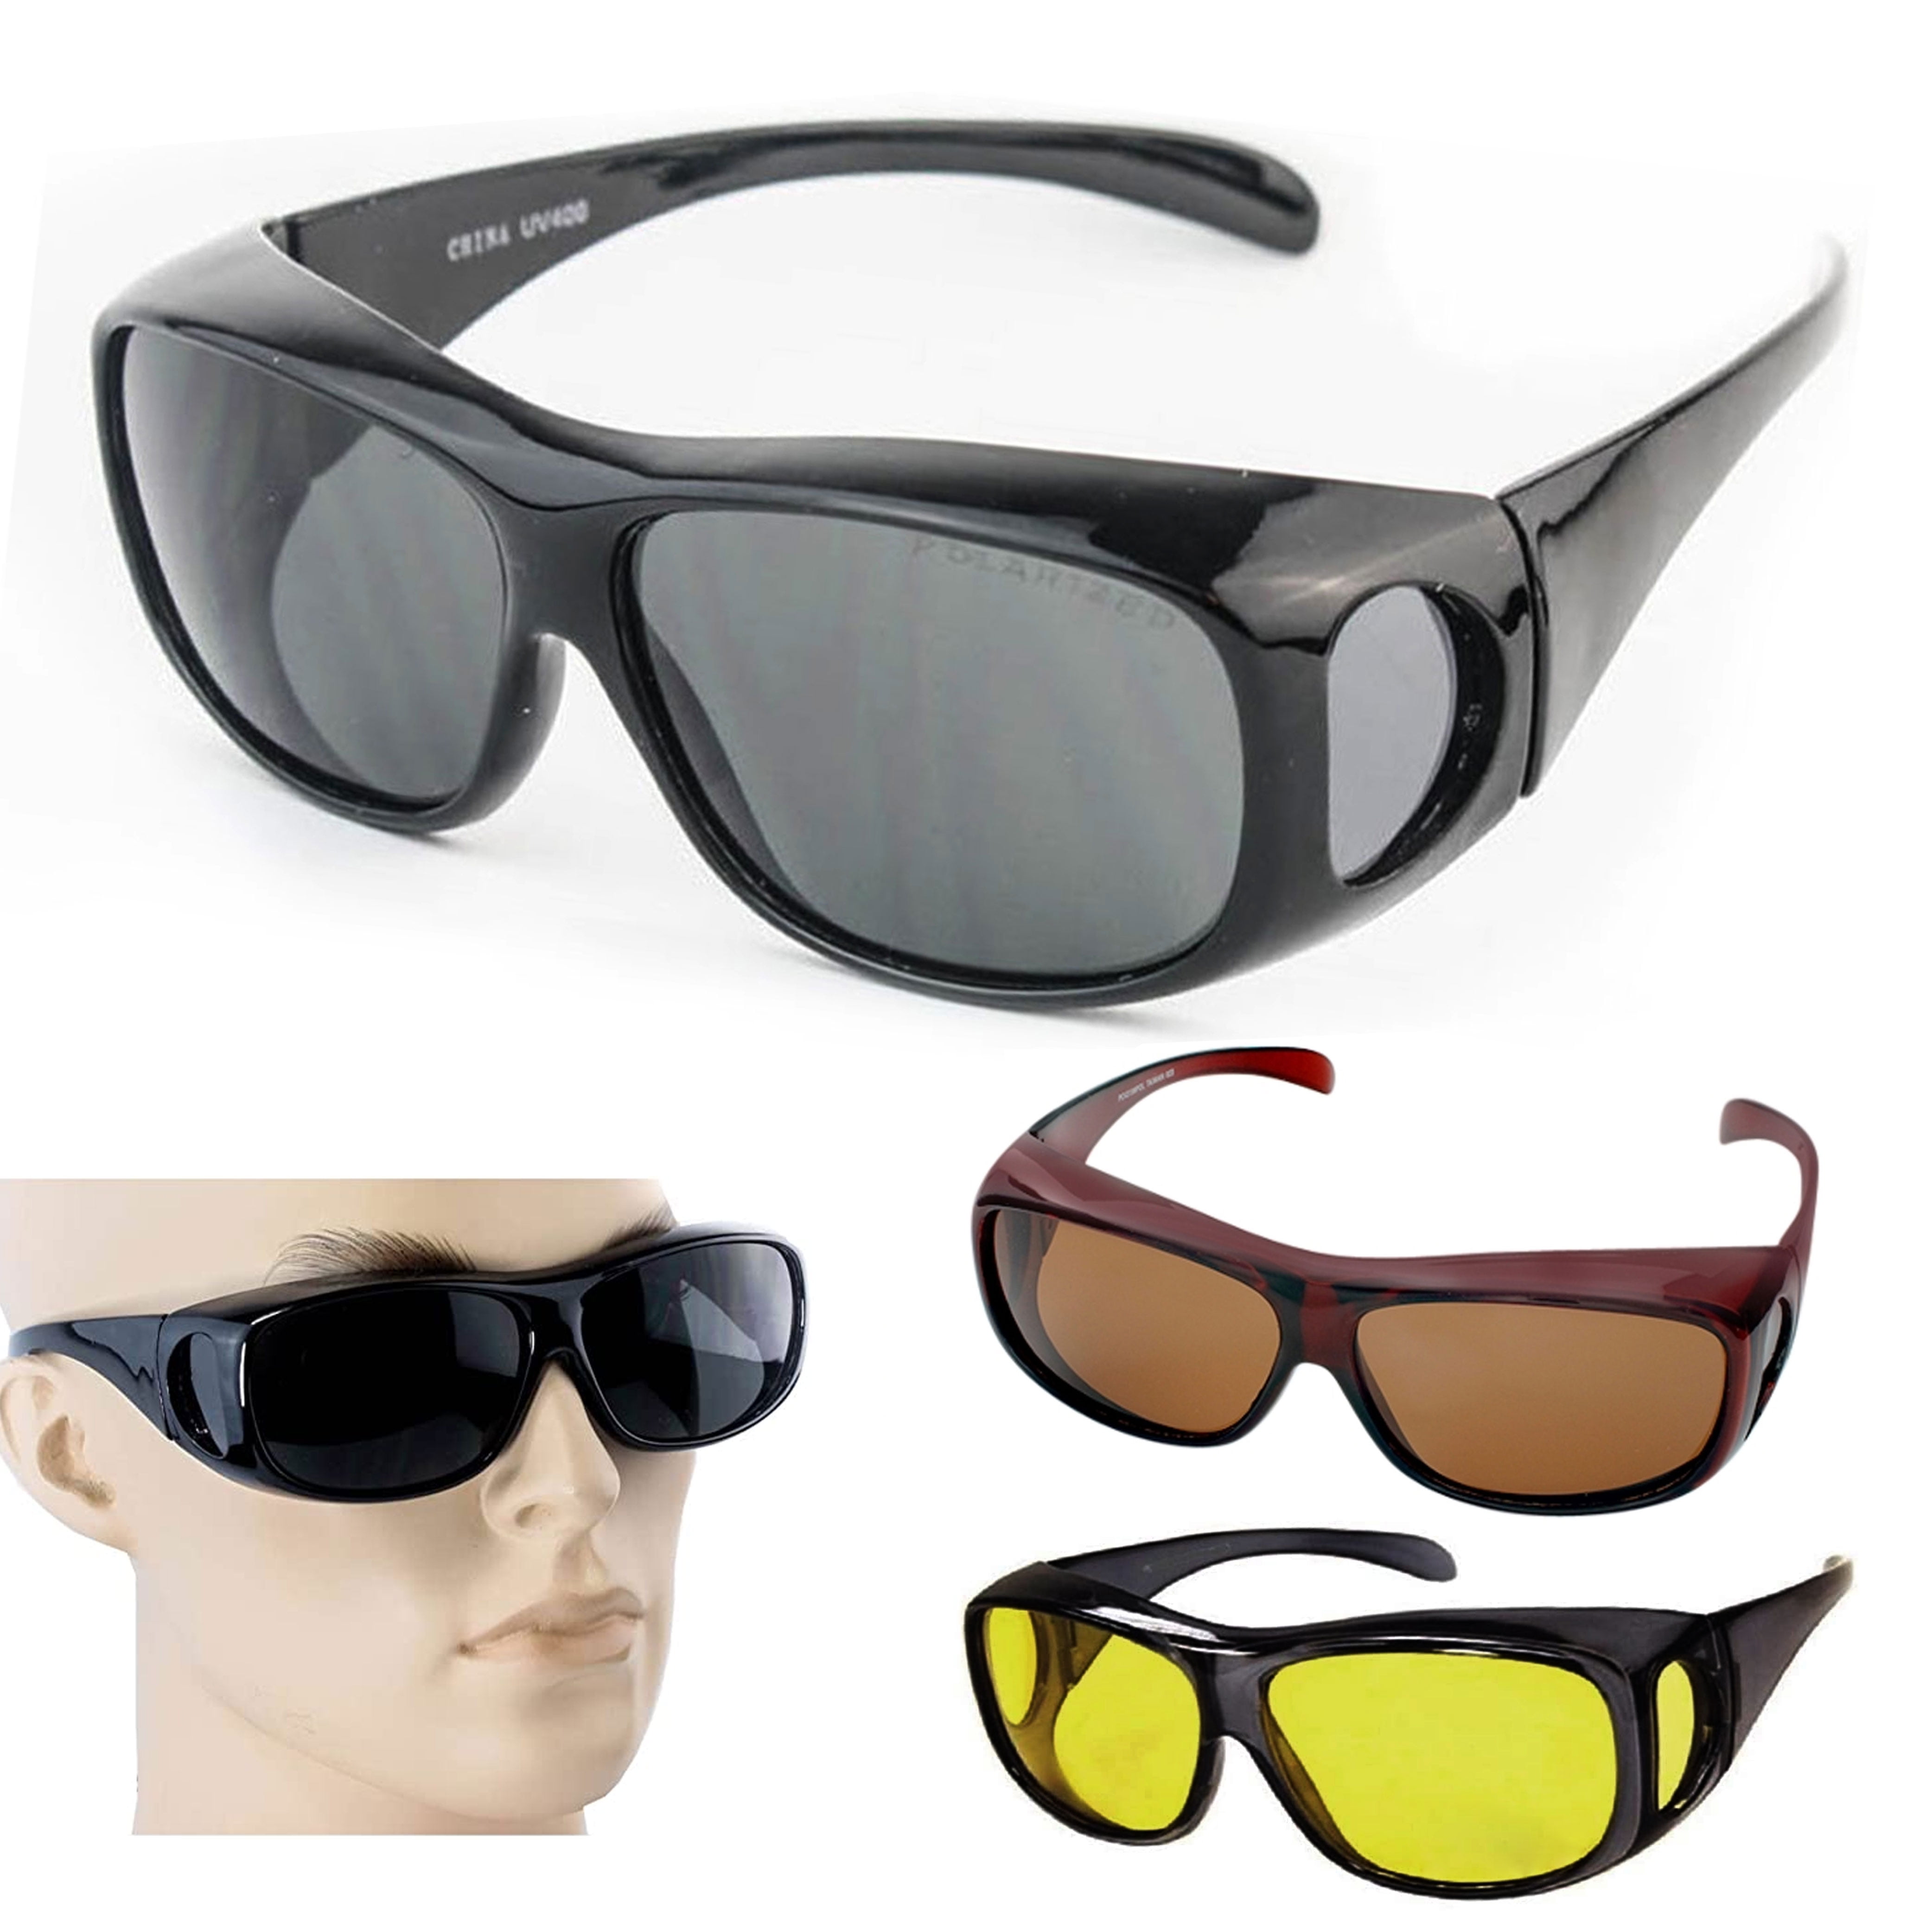 Buy Sunglasses Cover Online In India - Etsy India-mncb.edu.vn